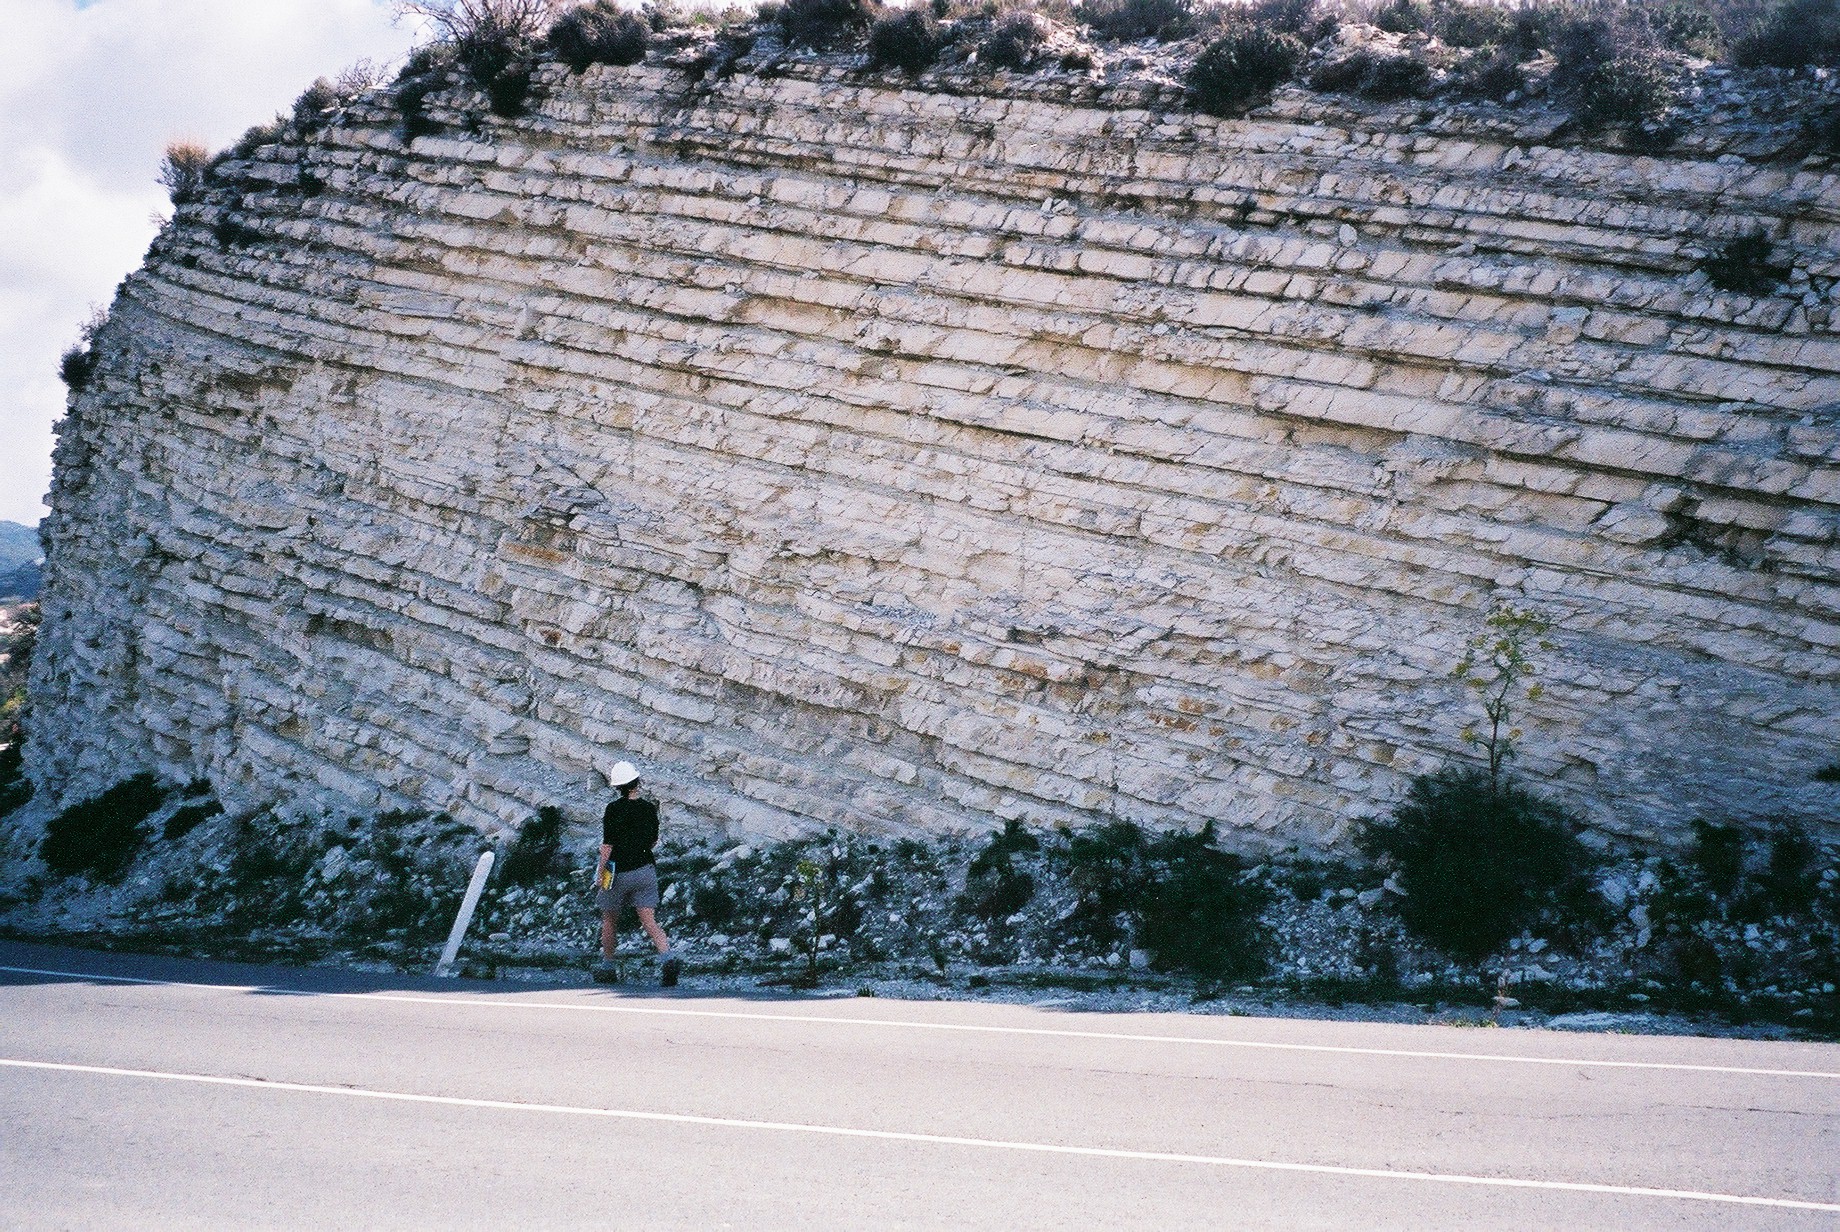 Chalk layers in Cyprus, showing sedimentary layering